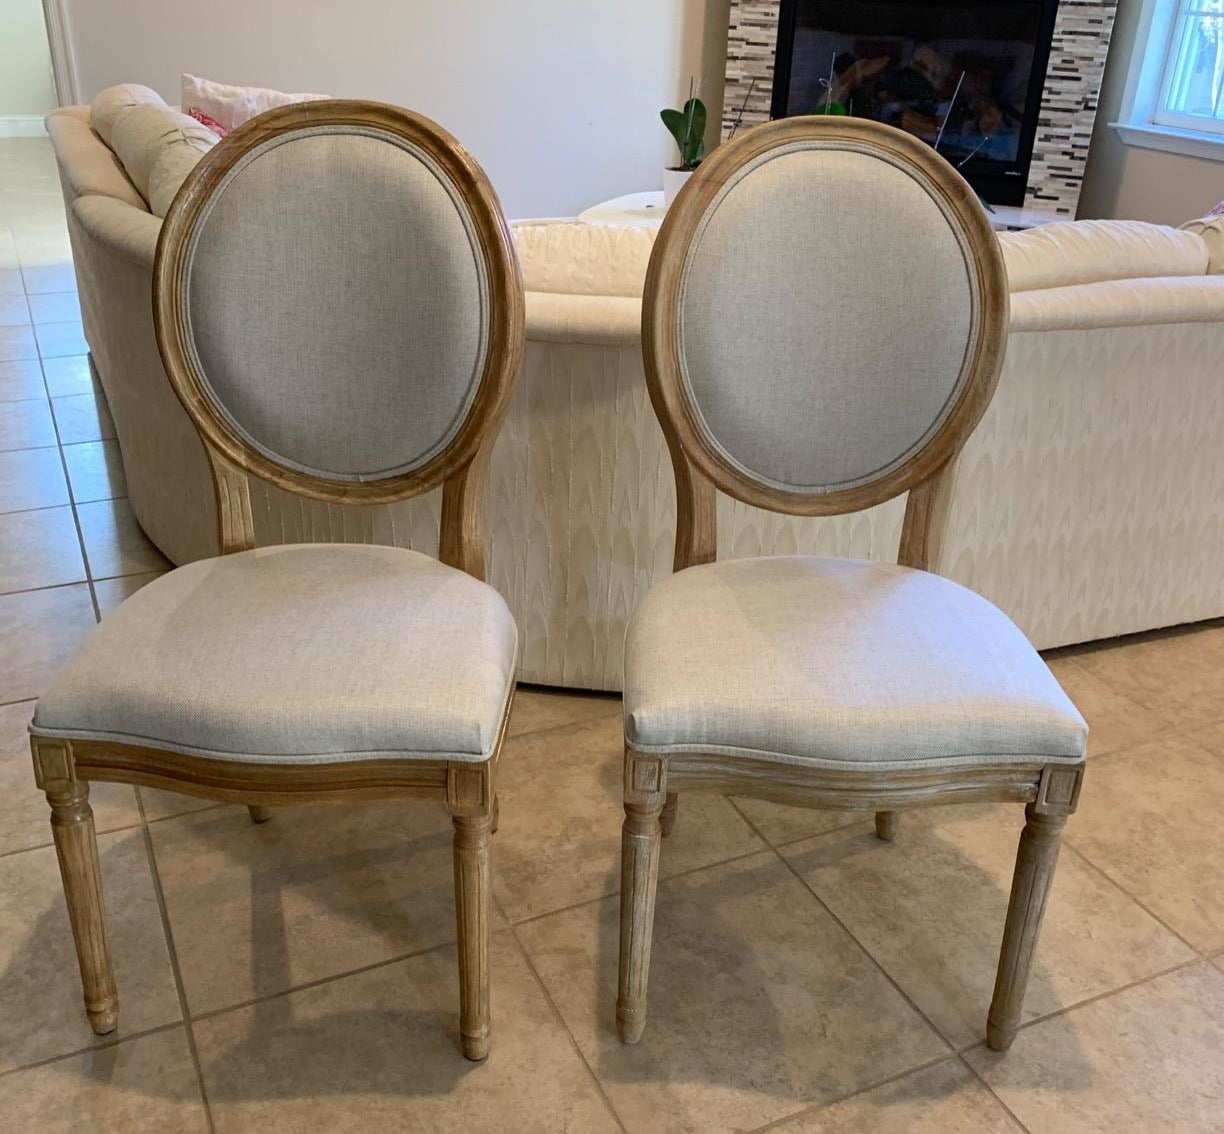 two fabric covered chairs